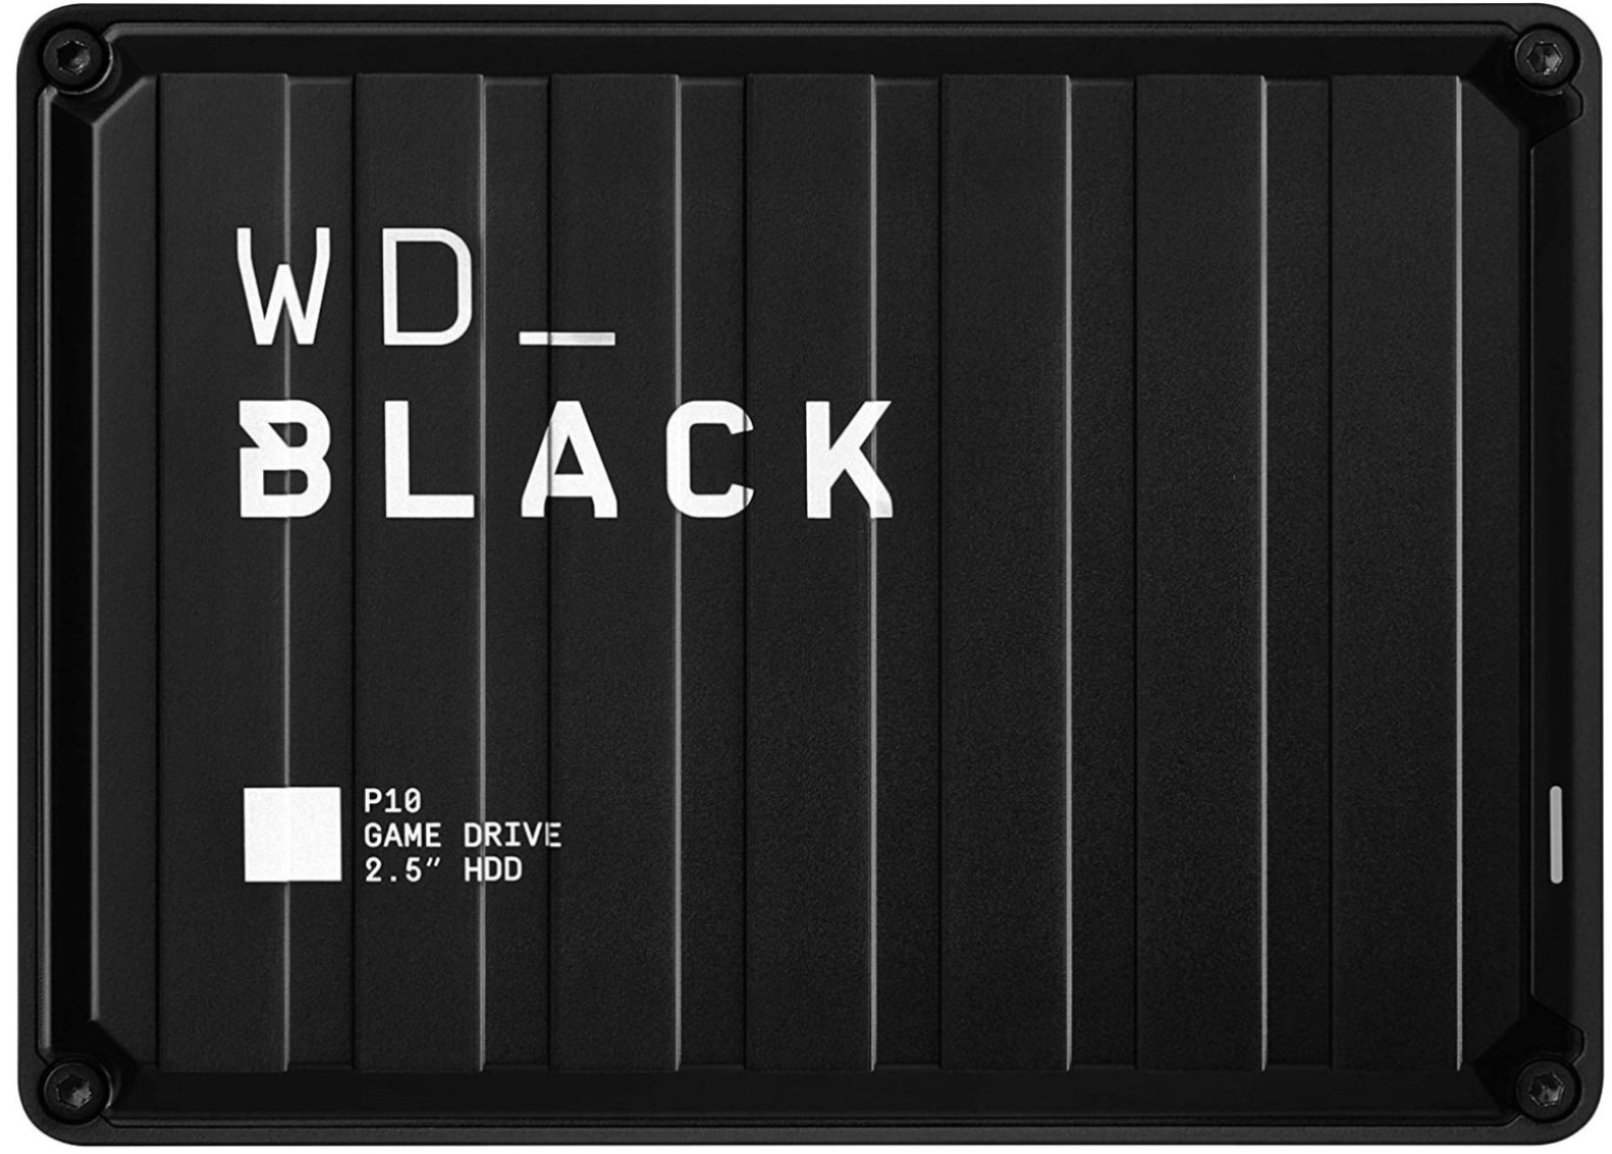 Onlu Pa Twitter Wd Black 4tb P10 Game Drive Works On Ps5 Ps4 For External Ps4 Game Storage Cdn 134 99 Free Shipping Amazon Canada T Co 01wgah41ny T Co 811y8ioedp